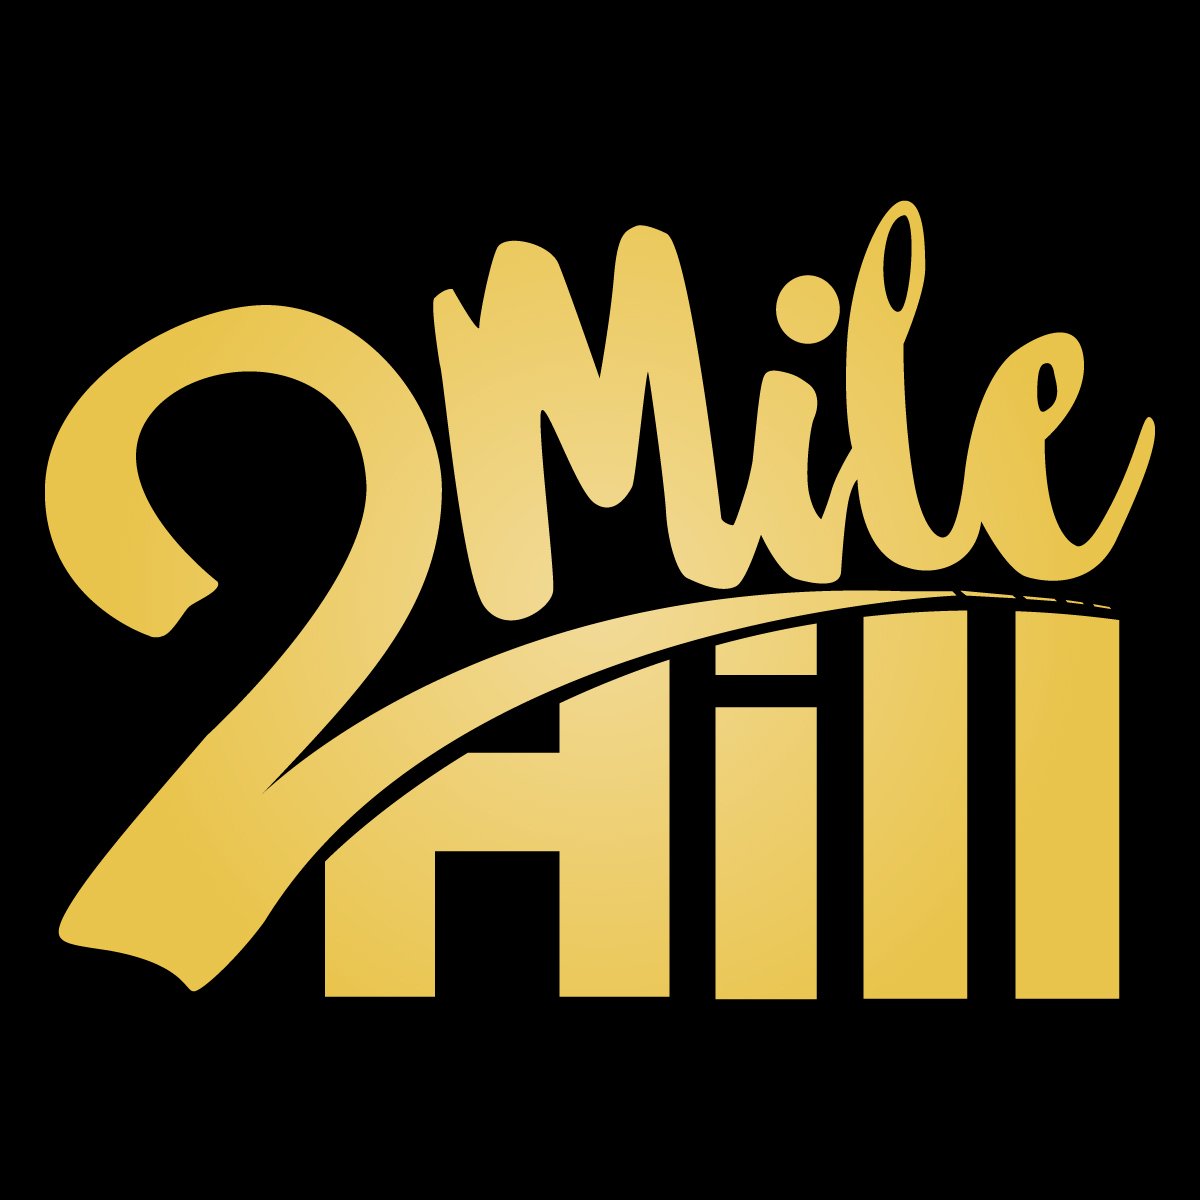 2 Mile Hill